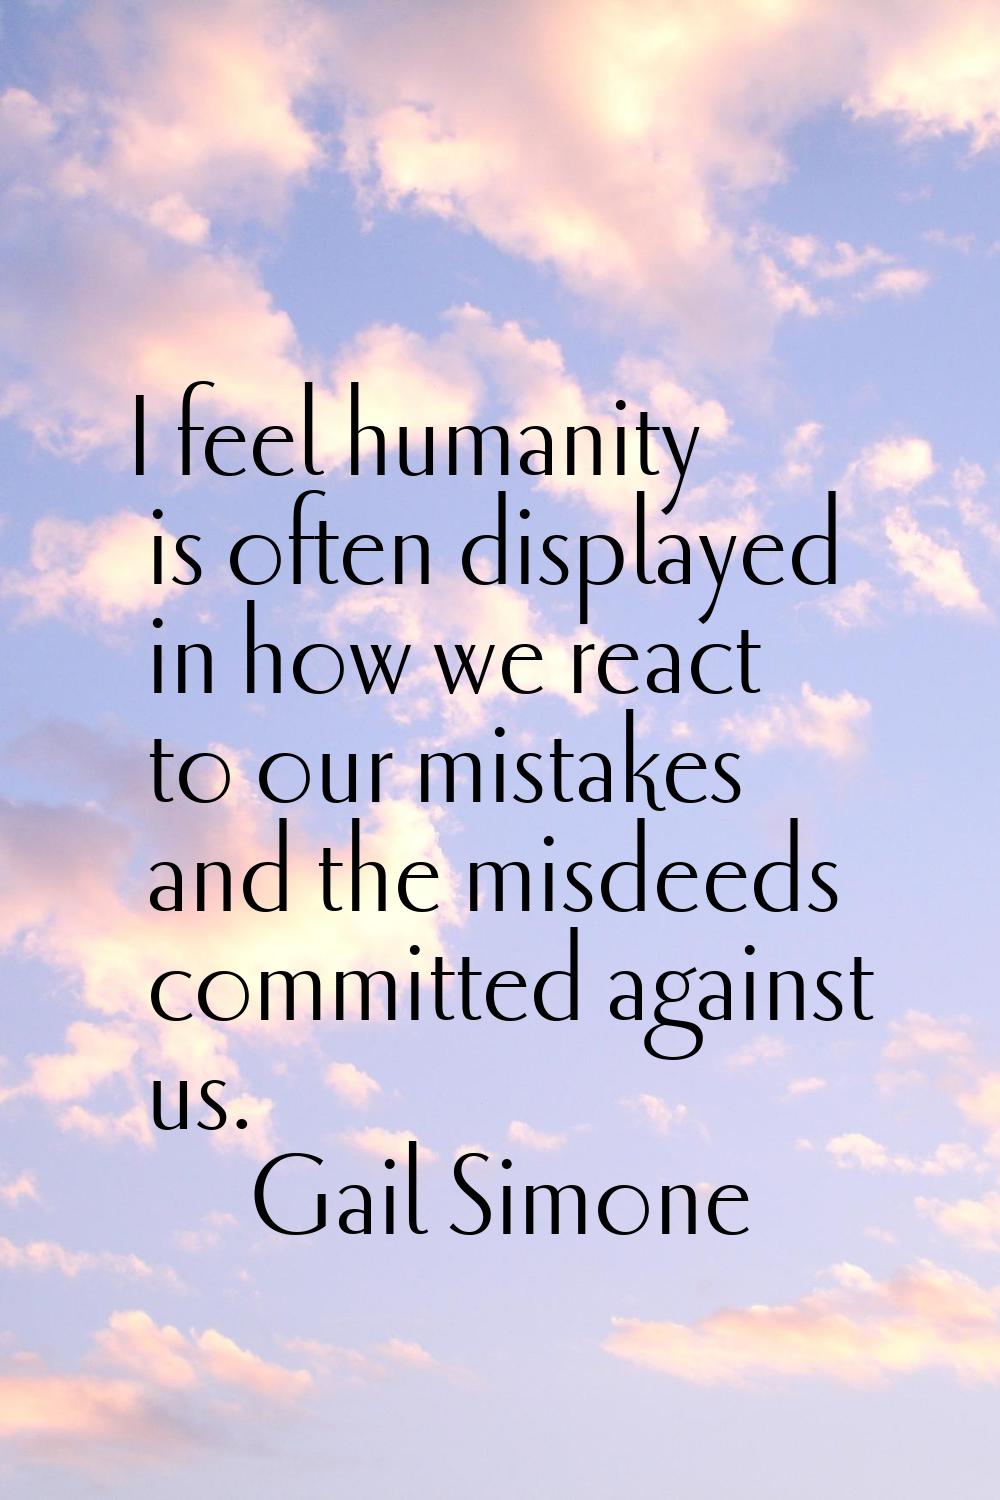 I feel humanity is often displayed in how we react to our mistakes and the misdeeds committed again